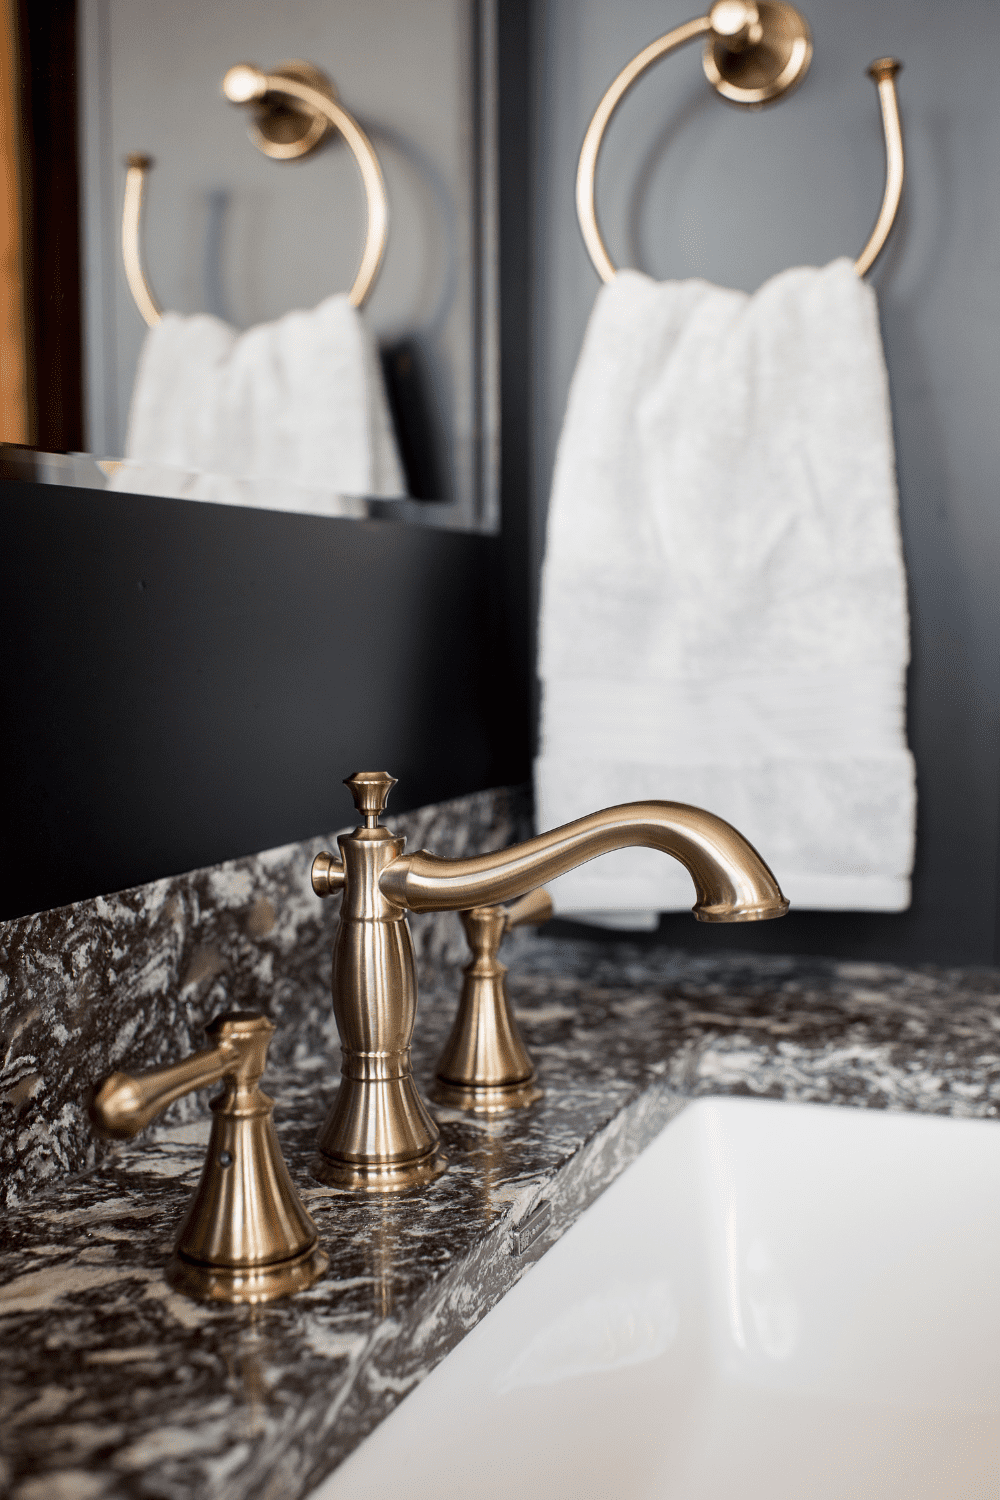 Nicholas Design Build | A bathroom with a marble counter top and brass faucet.